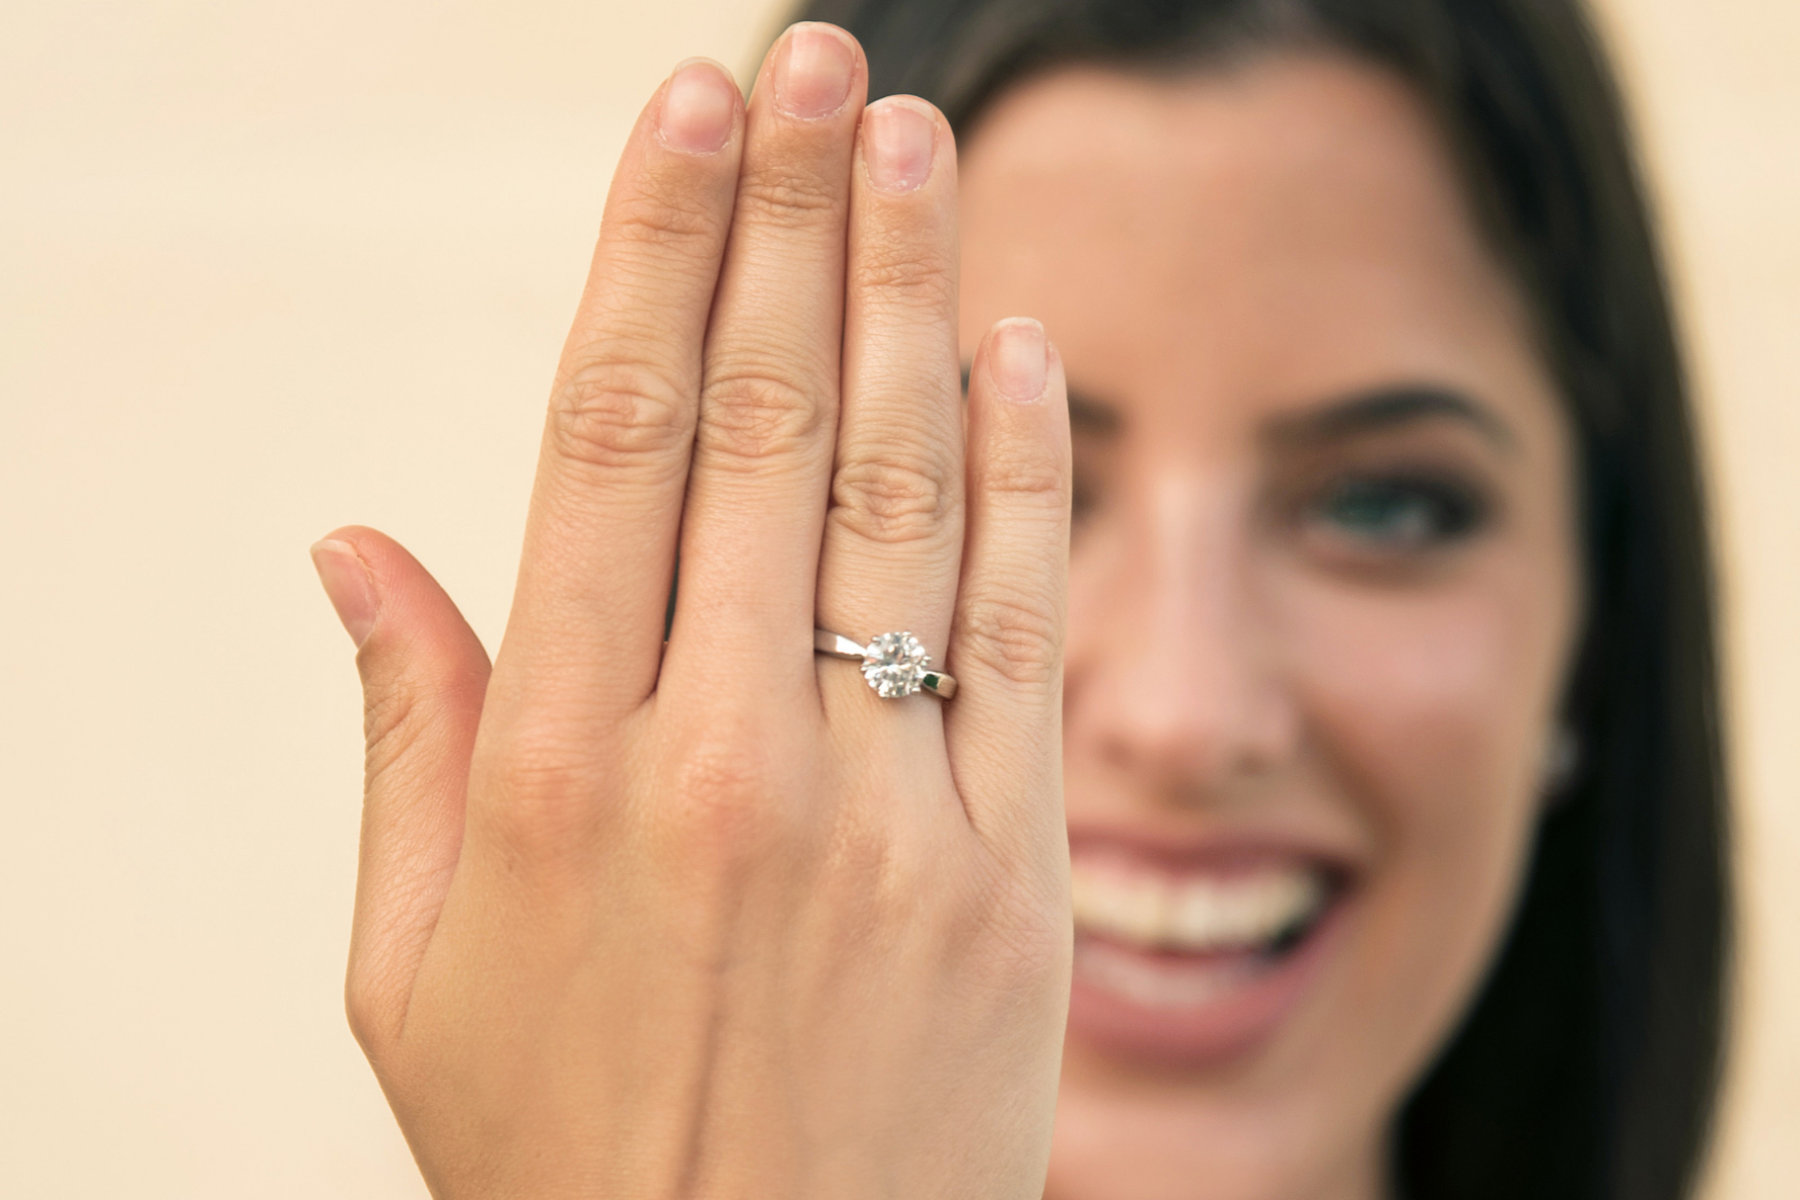 A woman showing a solitaire engagement ring on her finger